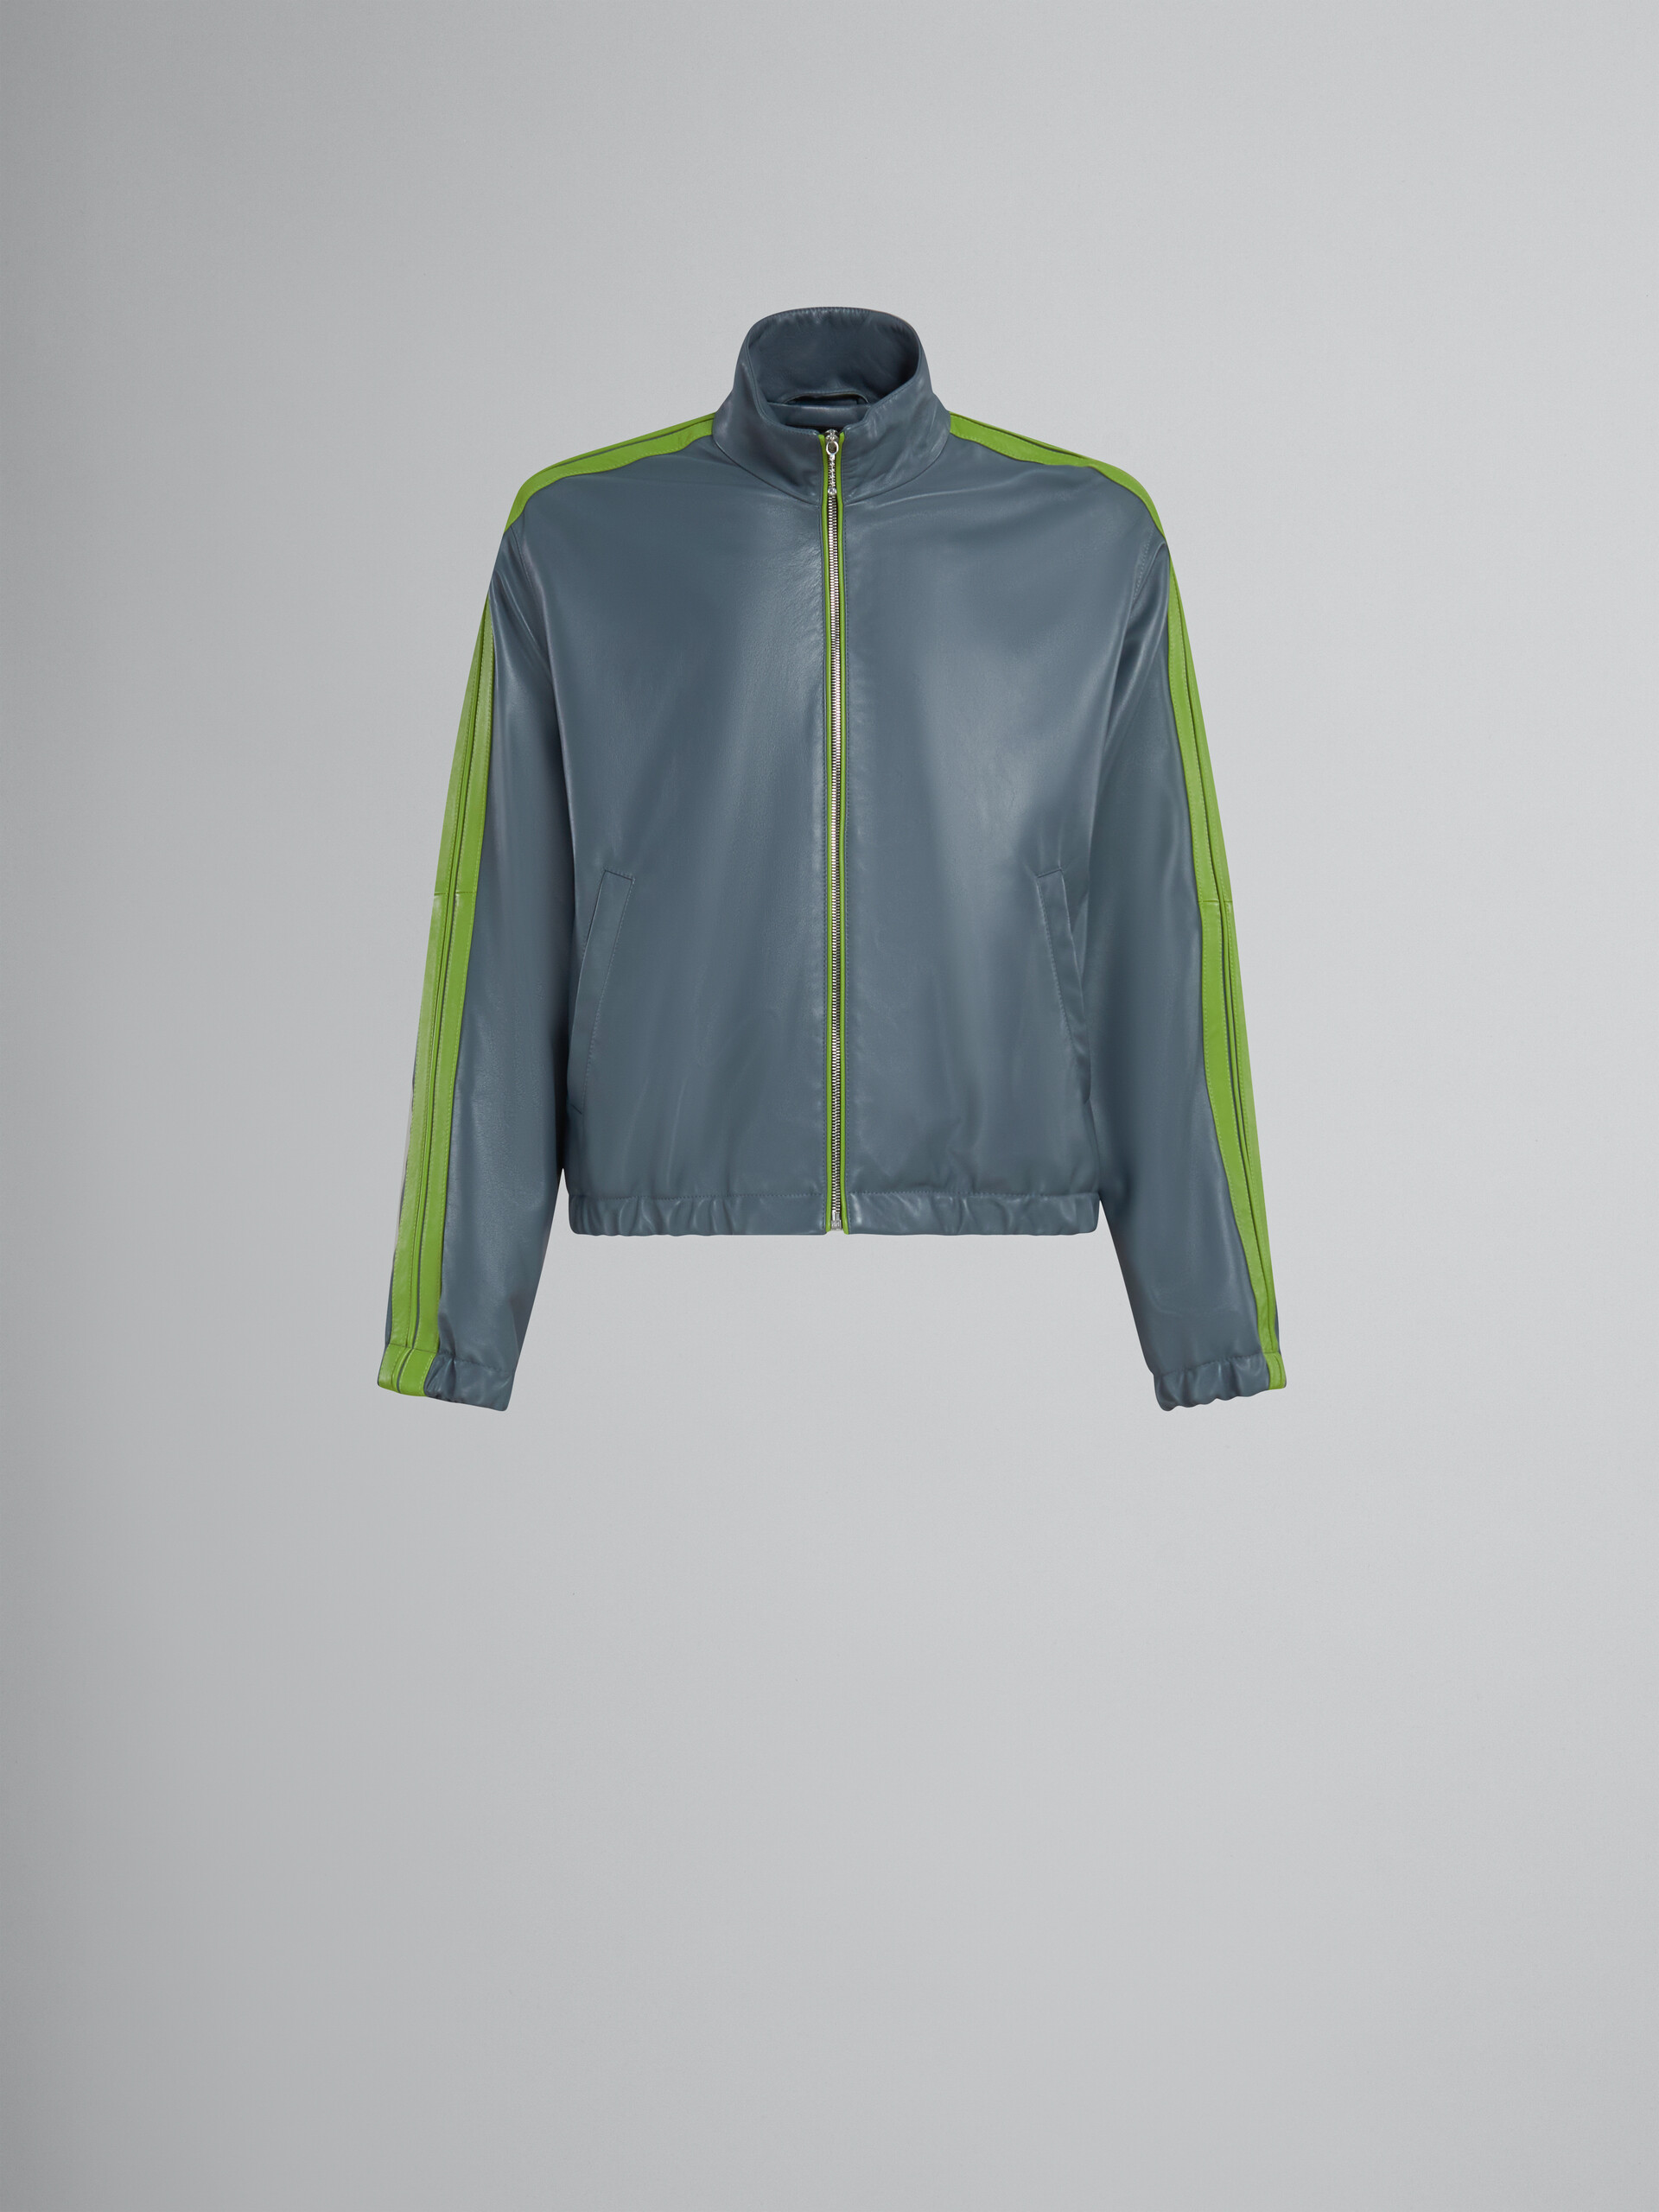 Teal nappa bomber with contrast stripes - Jackets - Image 1